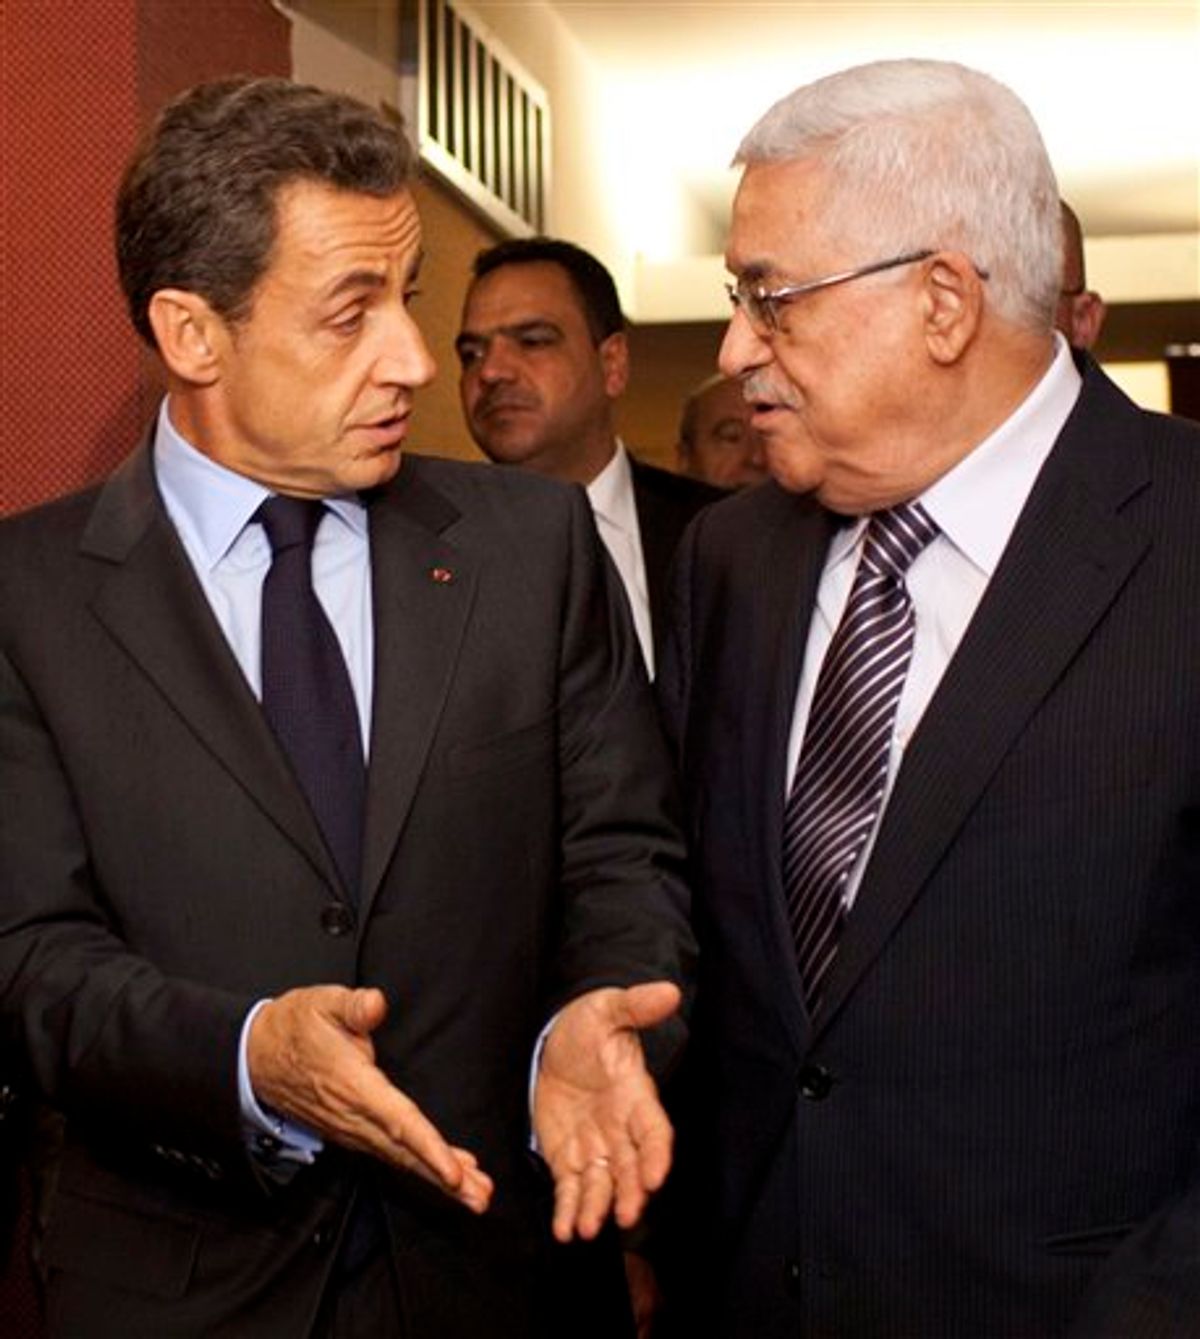 French President Nicolas Sarkozy, left, meets with Palestinian President Mahmoud Abbas at the Millennium Hotel in New York during the 66th session of the United Nations General Assembly on Tuesday, Sept. 20, 2011. (AP Photo/Andrew Burton) (AP)